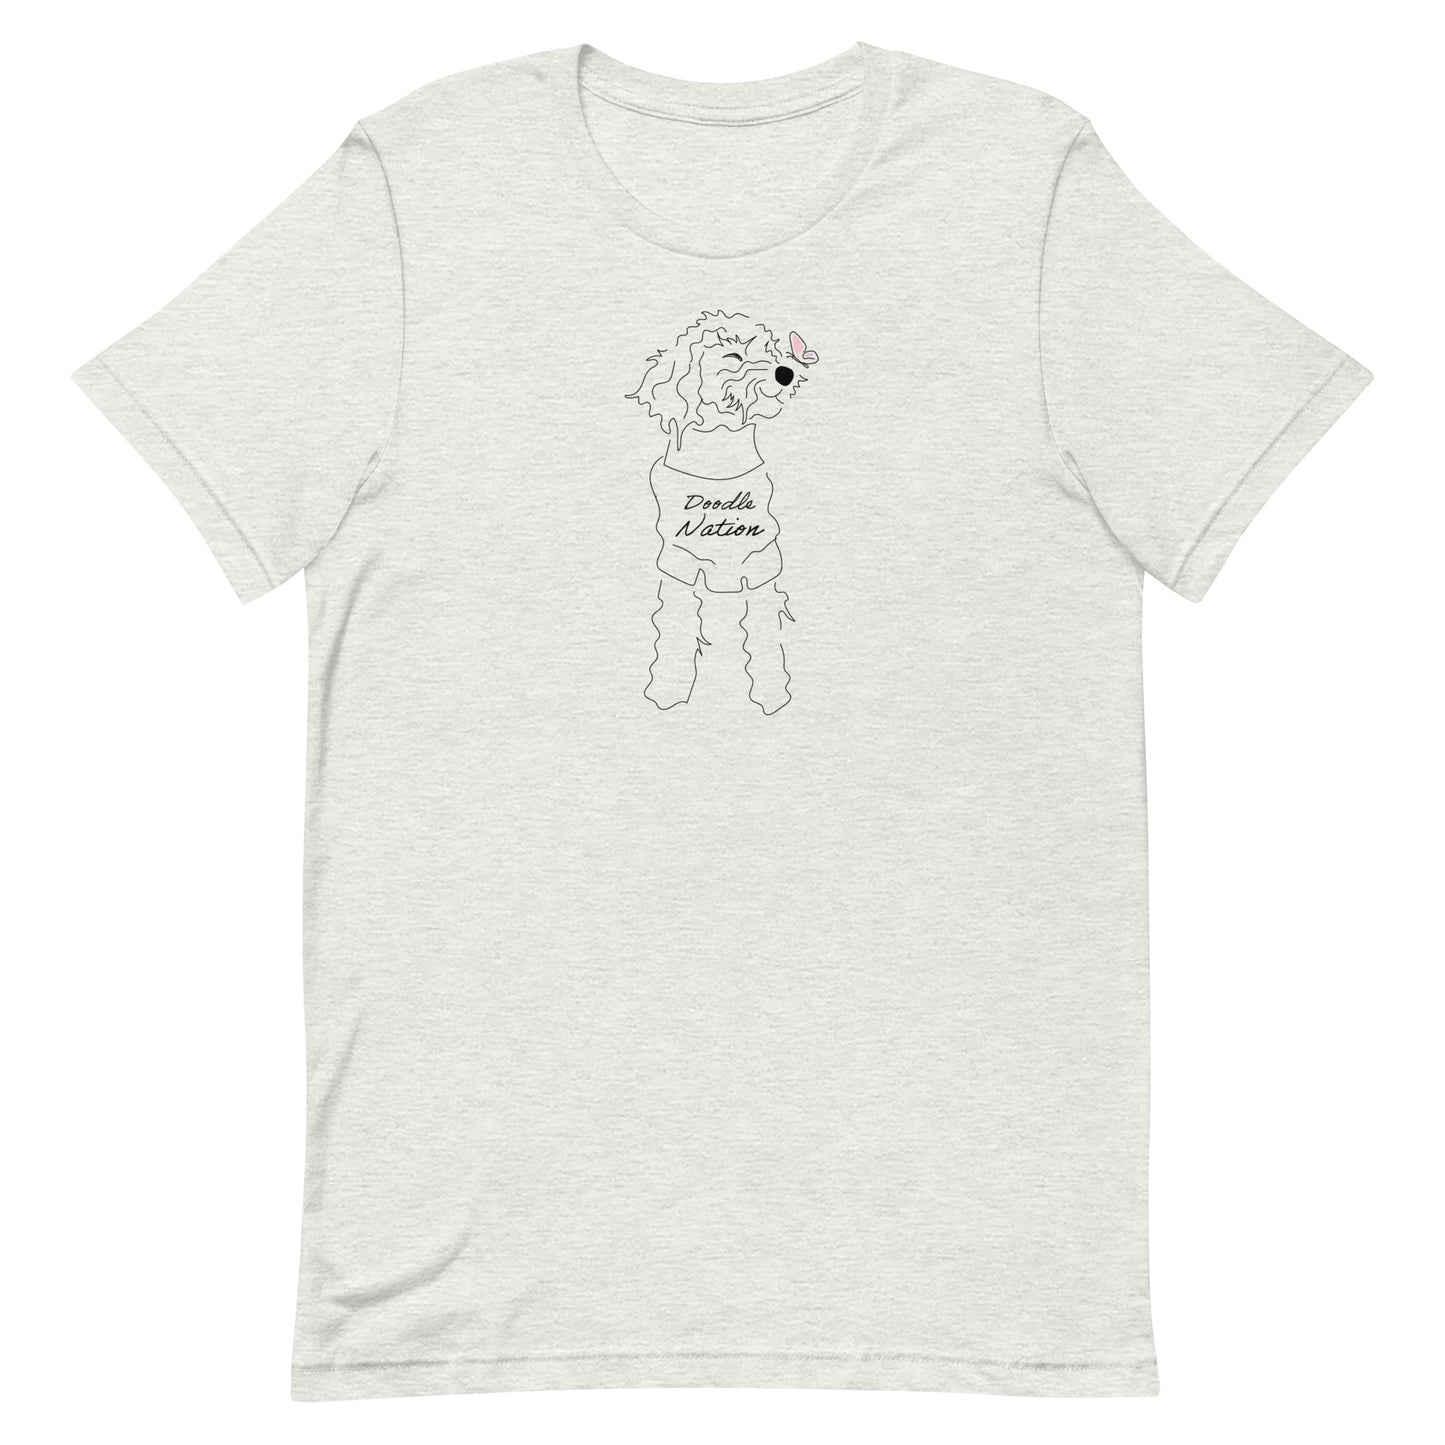 Goldendoodle t-shirt with Goldendoodle dog face and words "Doodle Nation" in ash color